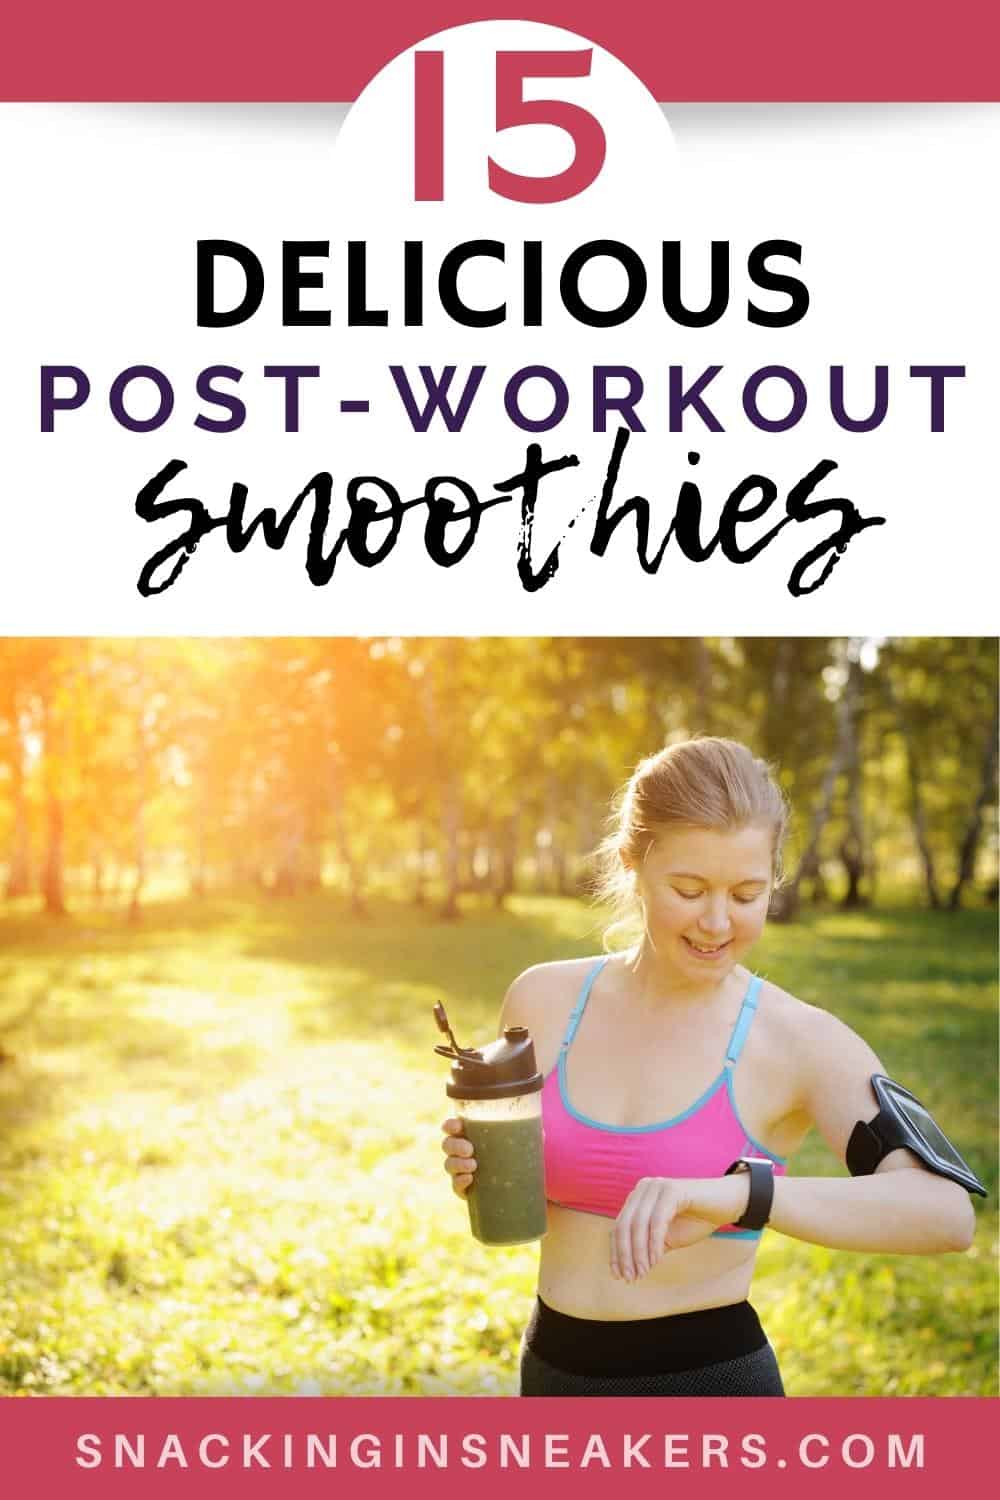 5 Best Post-Workout Smoothie Recipes